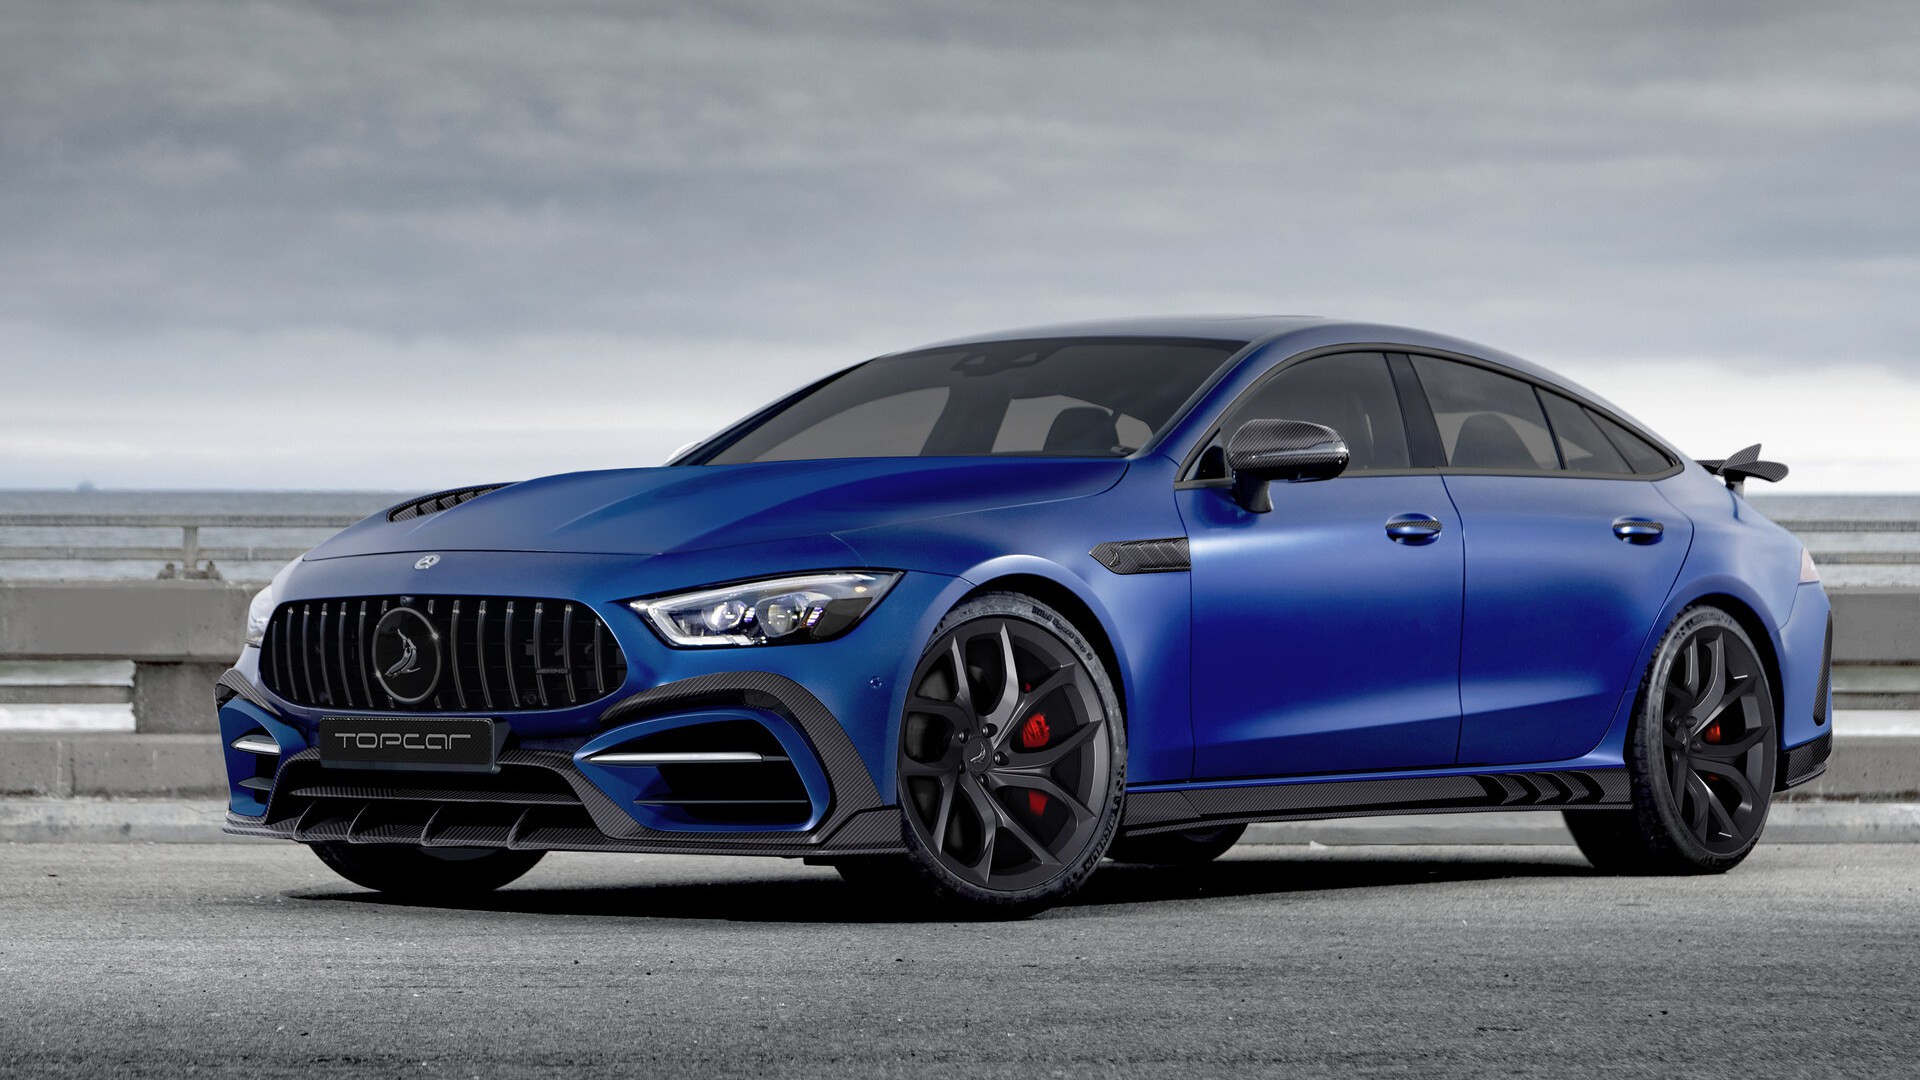 The aerodynamic package INFERNO for MercedesAMG GT 63S 4Door Coupe